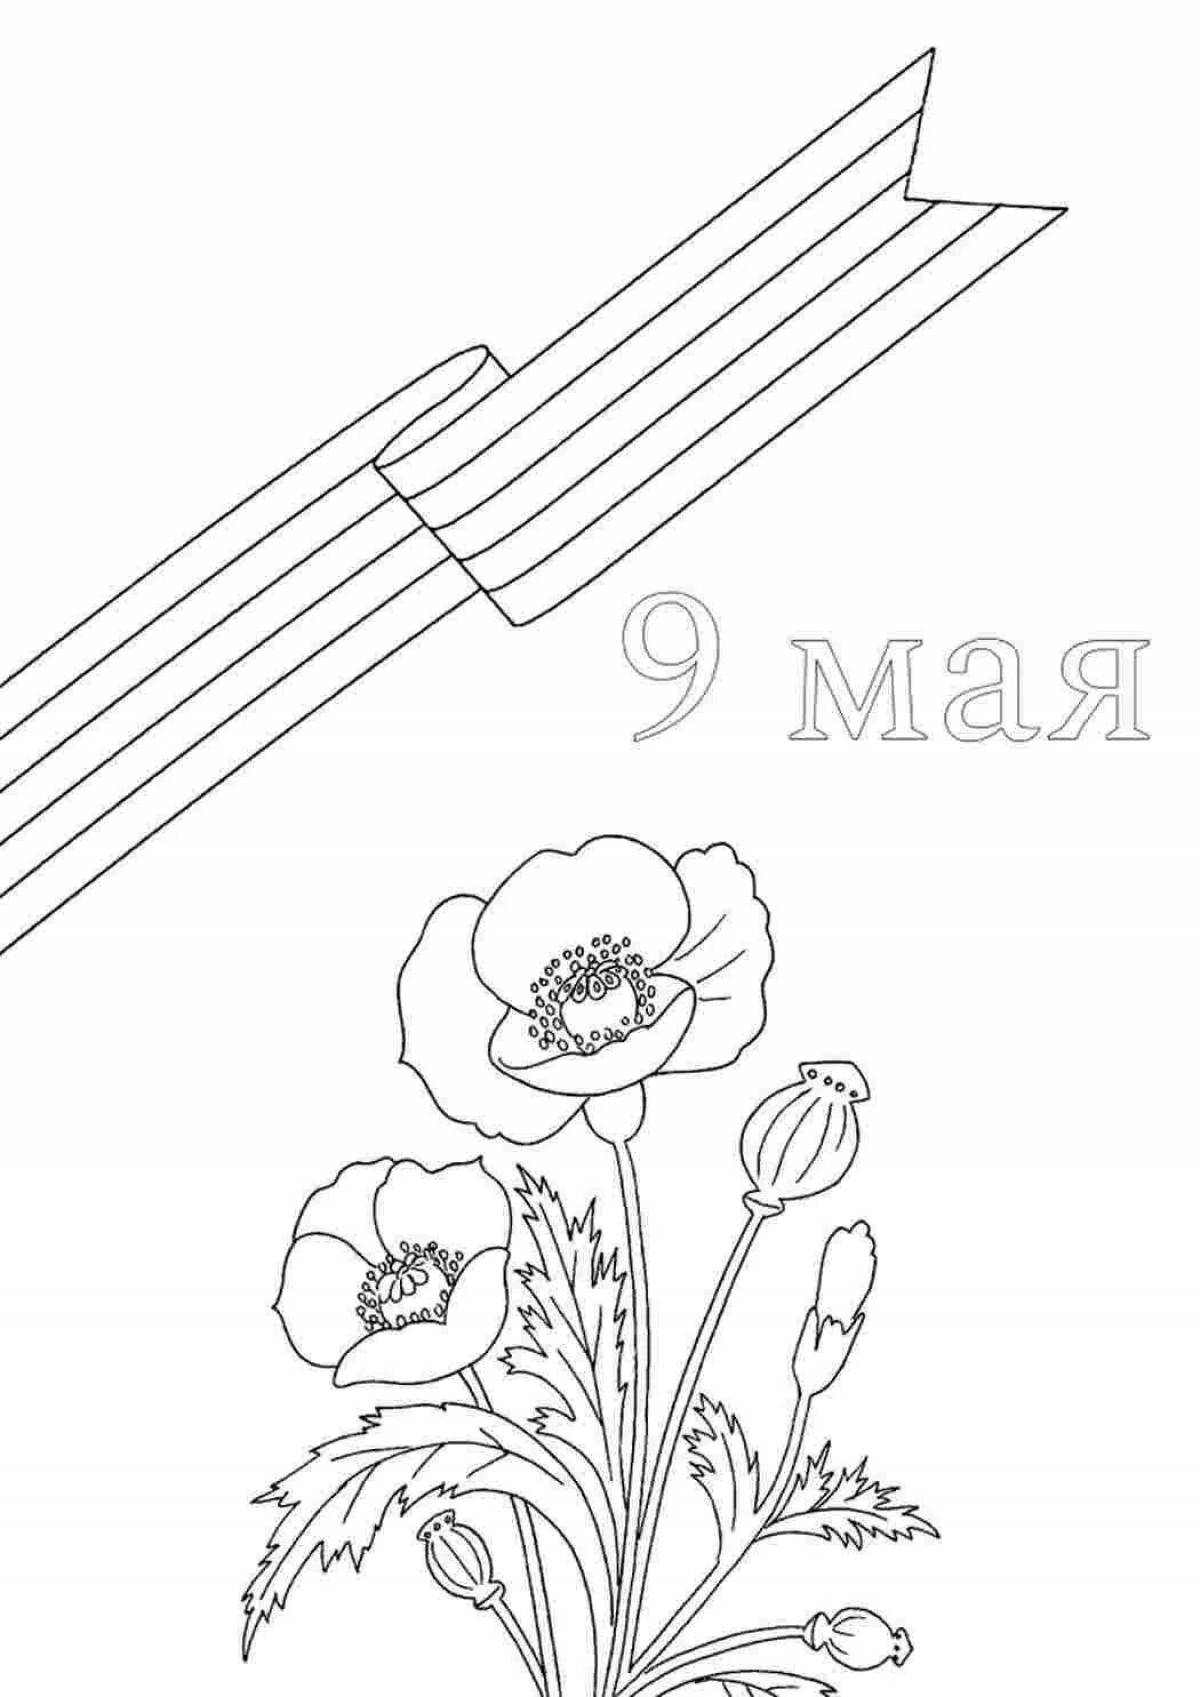 Radiant carnation coloring for May 9th